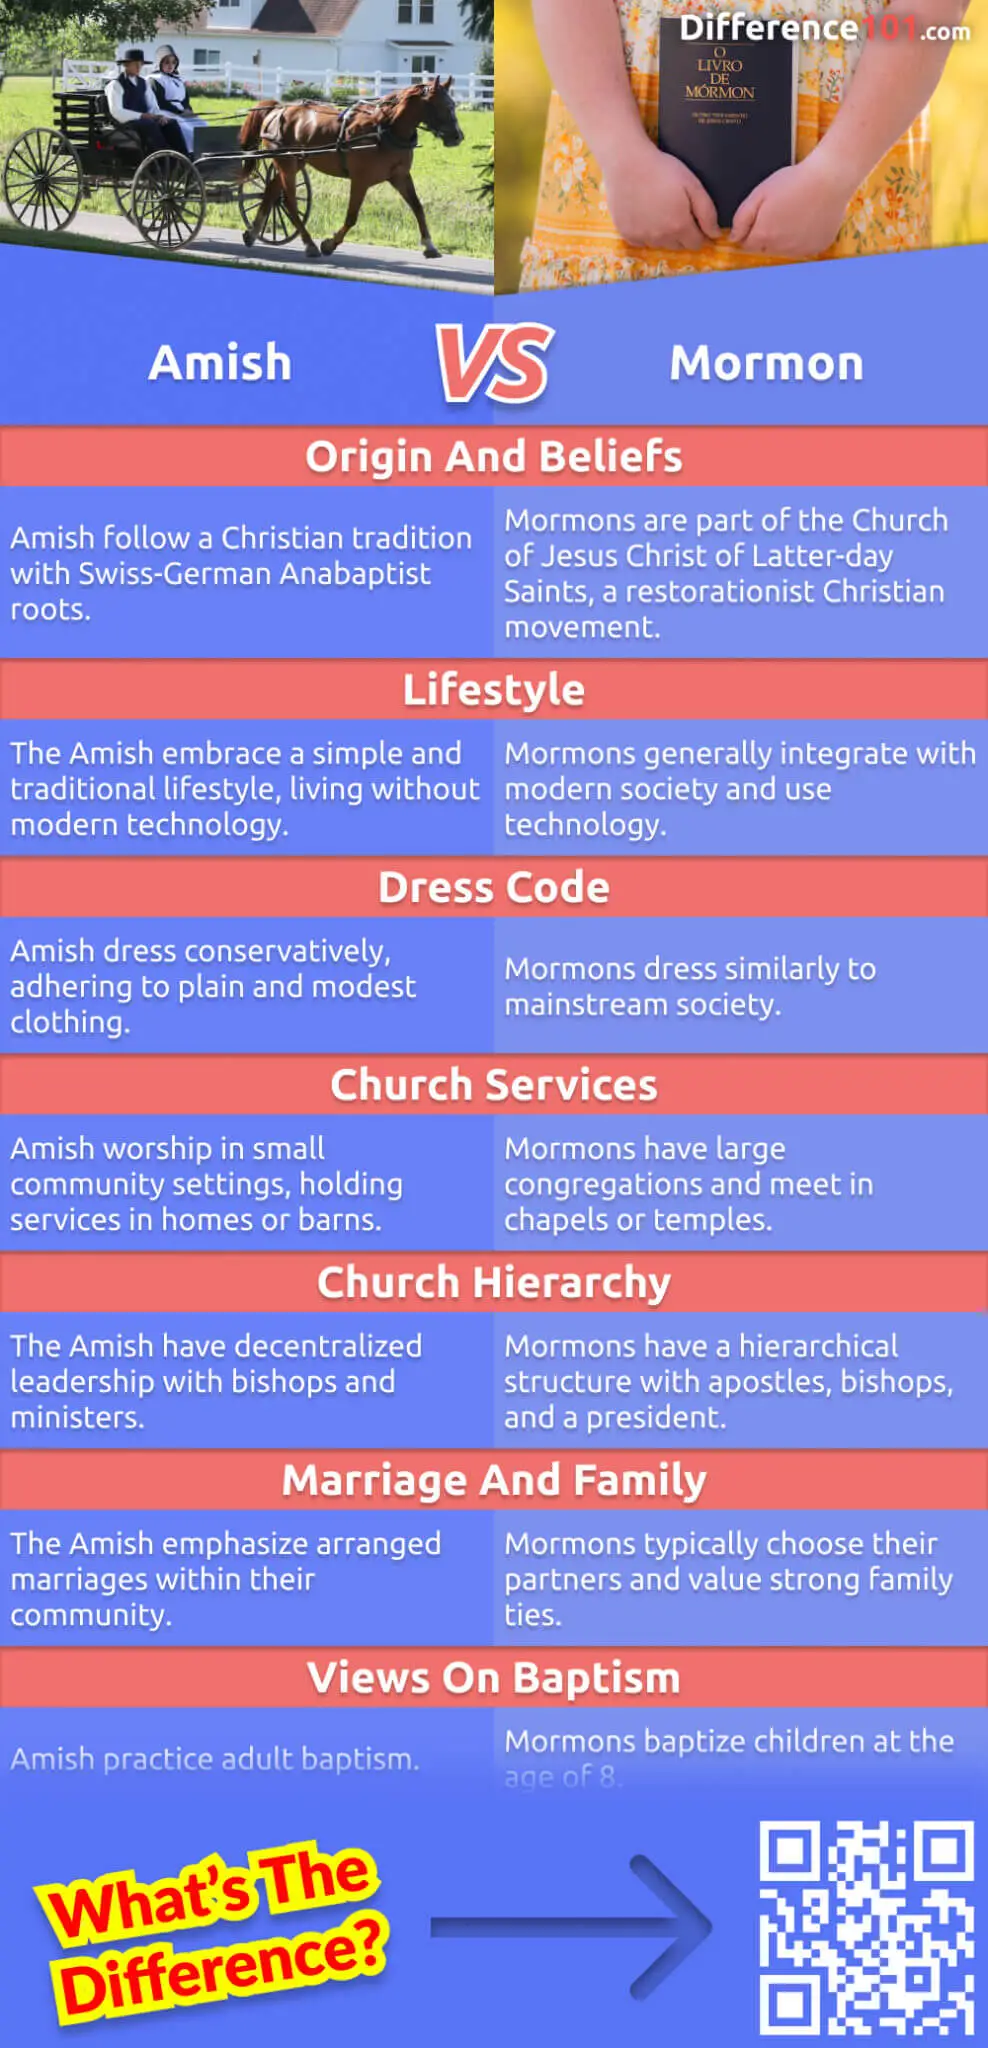 Discover everything you need to know about the differences between Amish and Mormon communities in this enlightening article. Explore their beliefs, practices, histories, and cultural traditions. Gain a deeper understanding of these distinct religious groups.